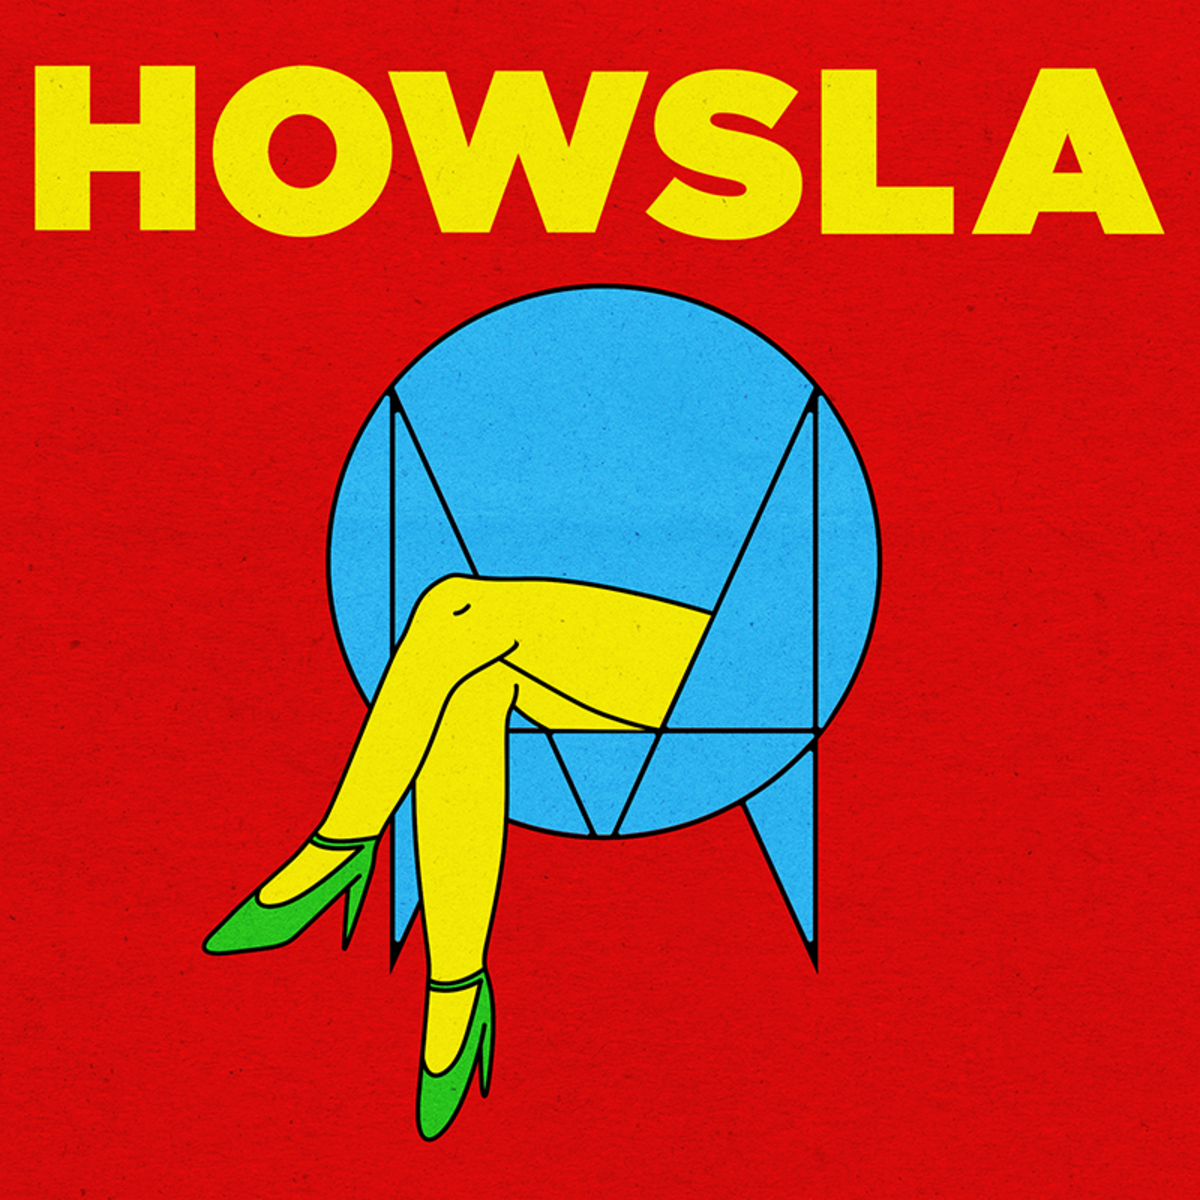 HOWSLA